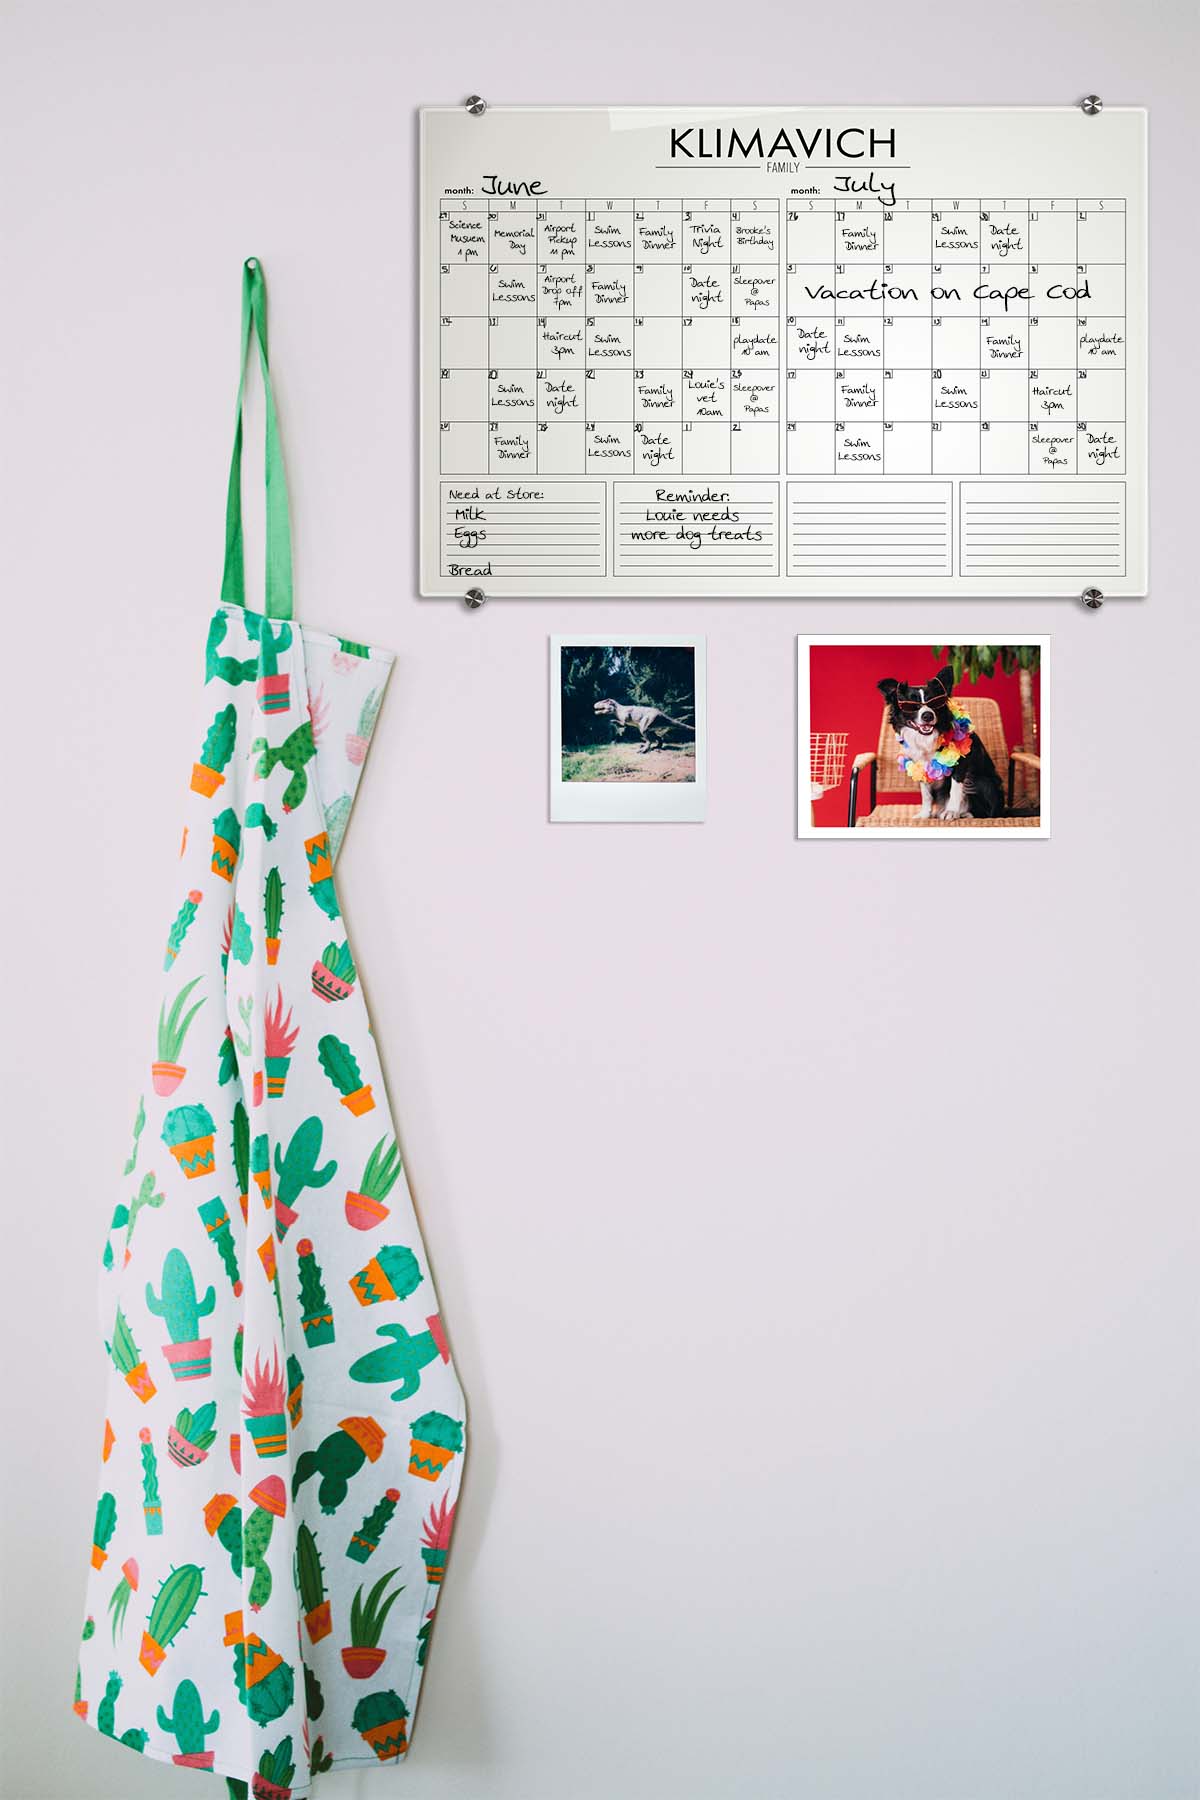 Personalized Family Calendar Can Simplify Your Life.